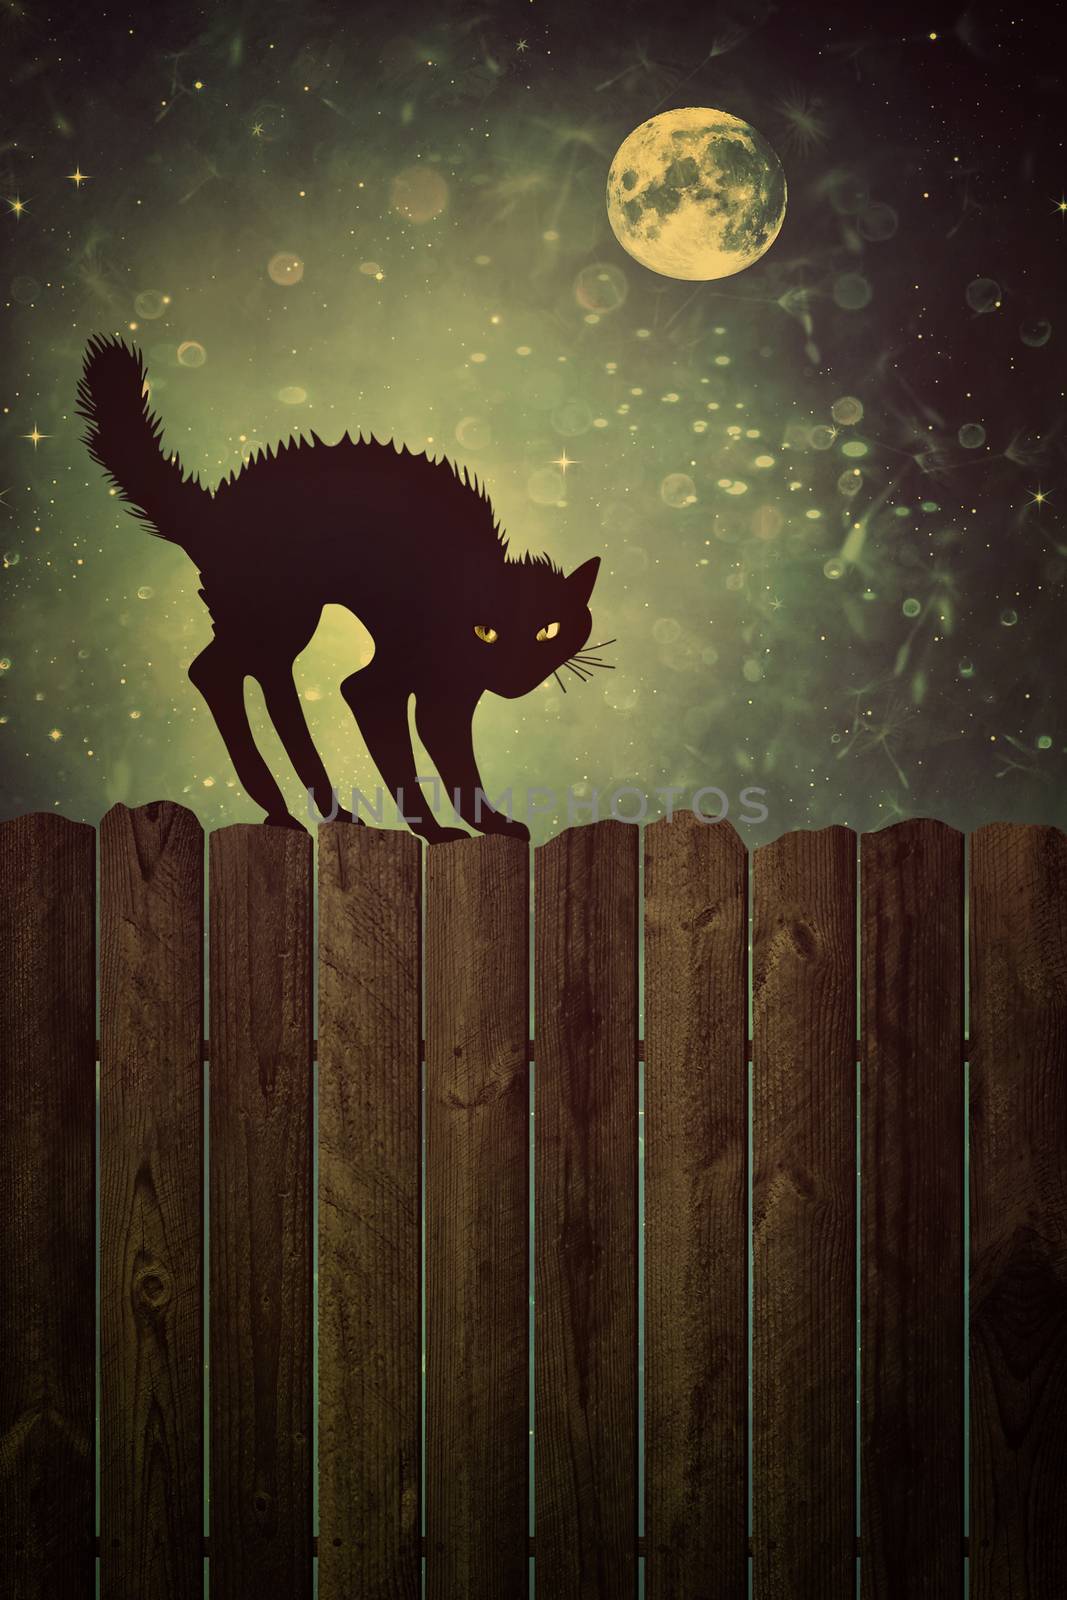 Black cat on fence at  night with vintage look by Sandralise